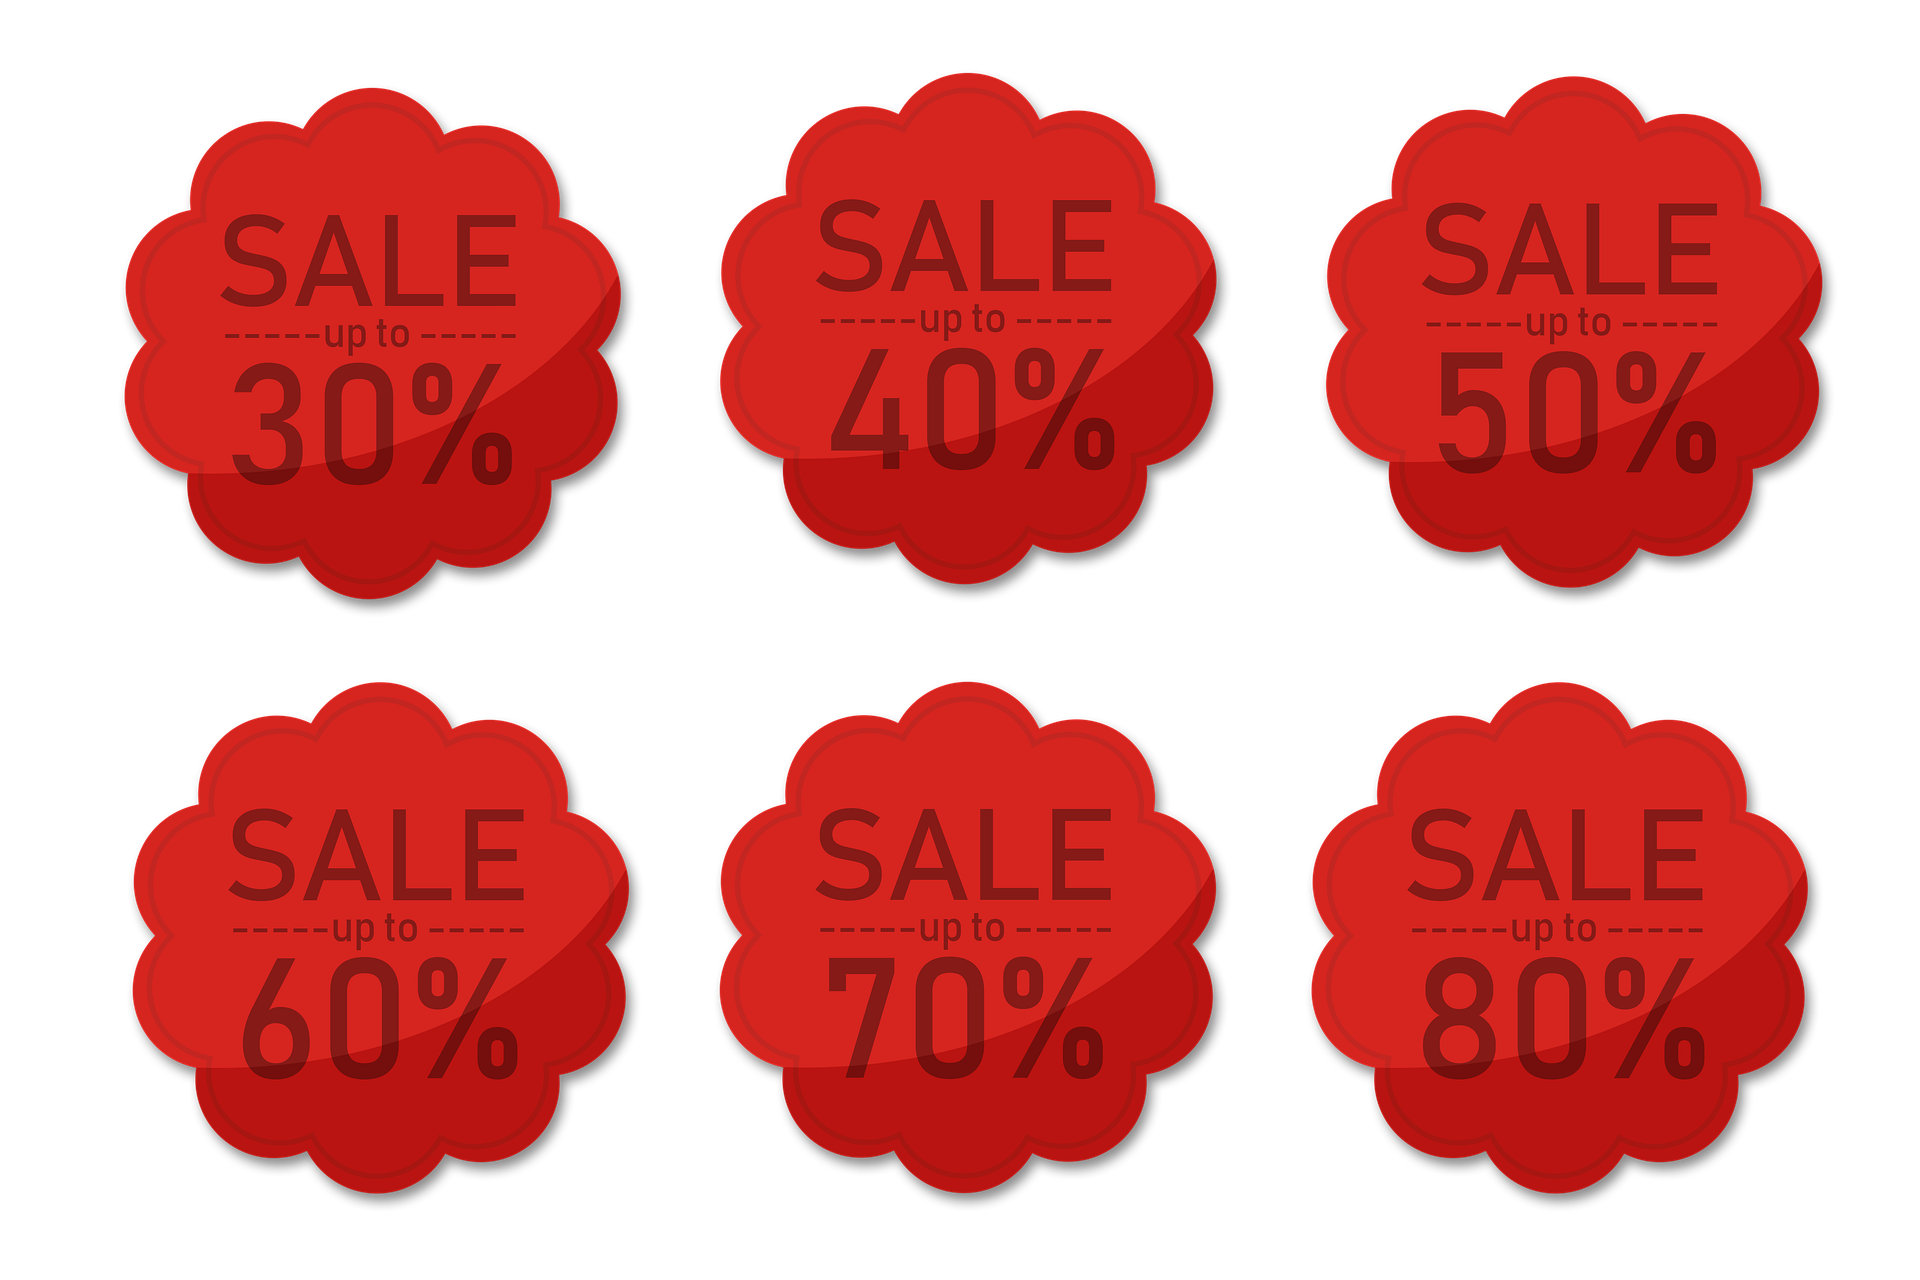 Six sales buttons that all offer different discounts